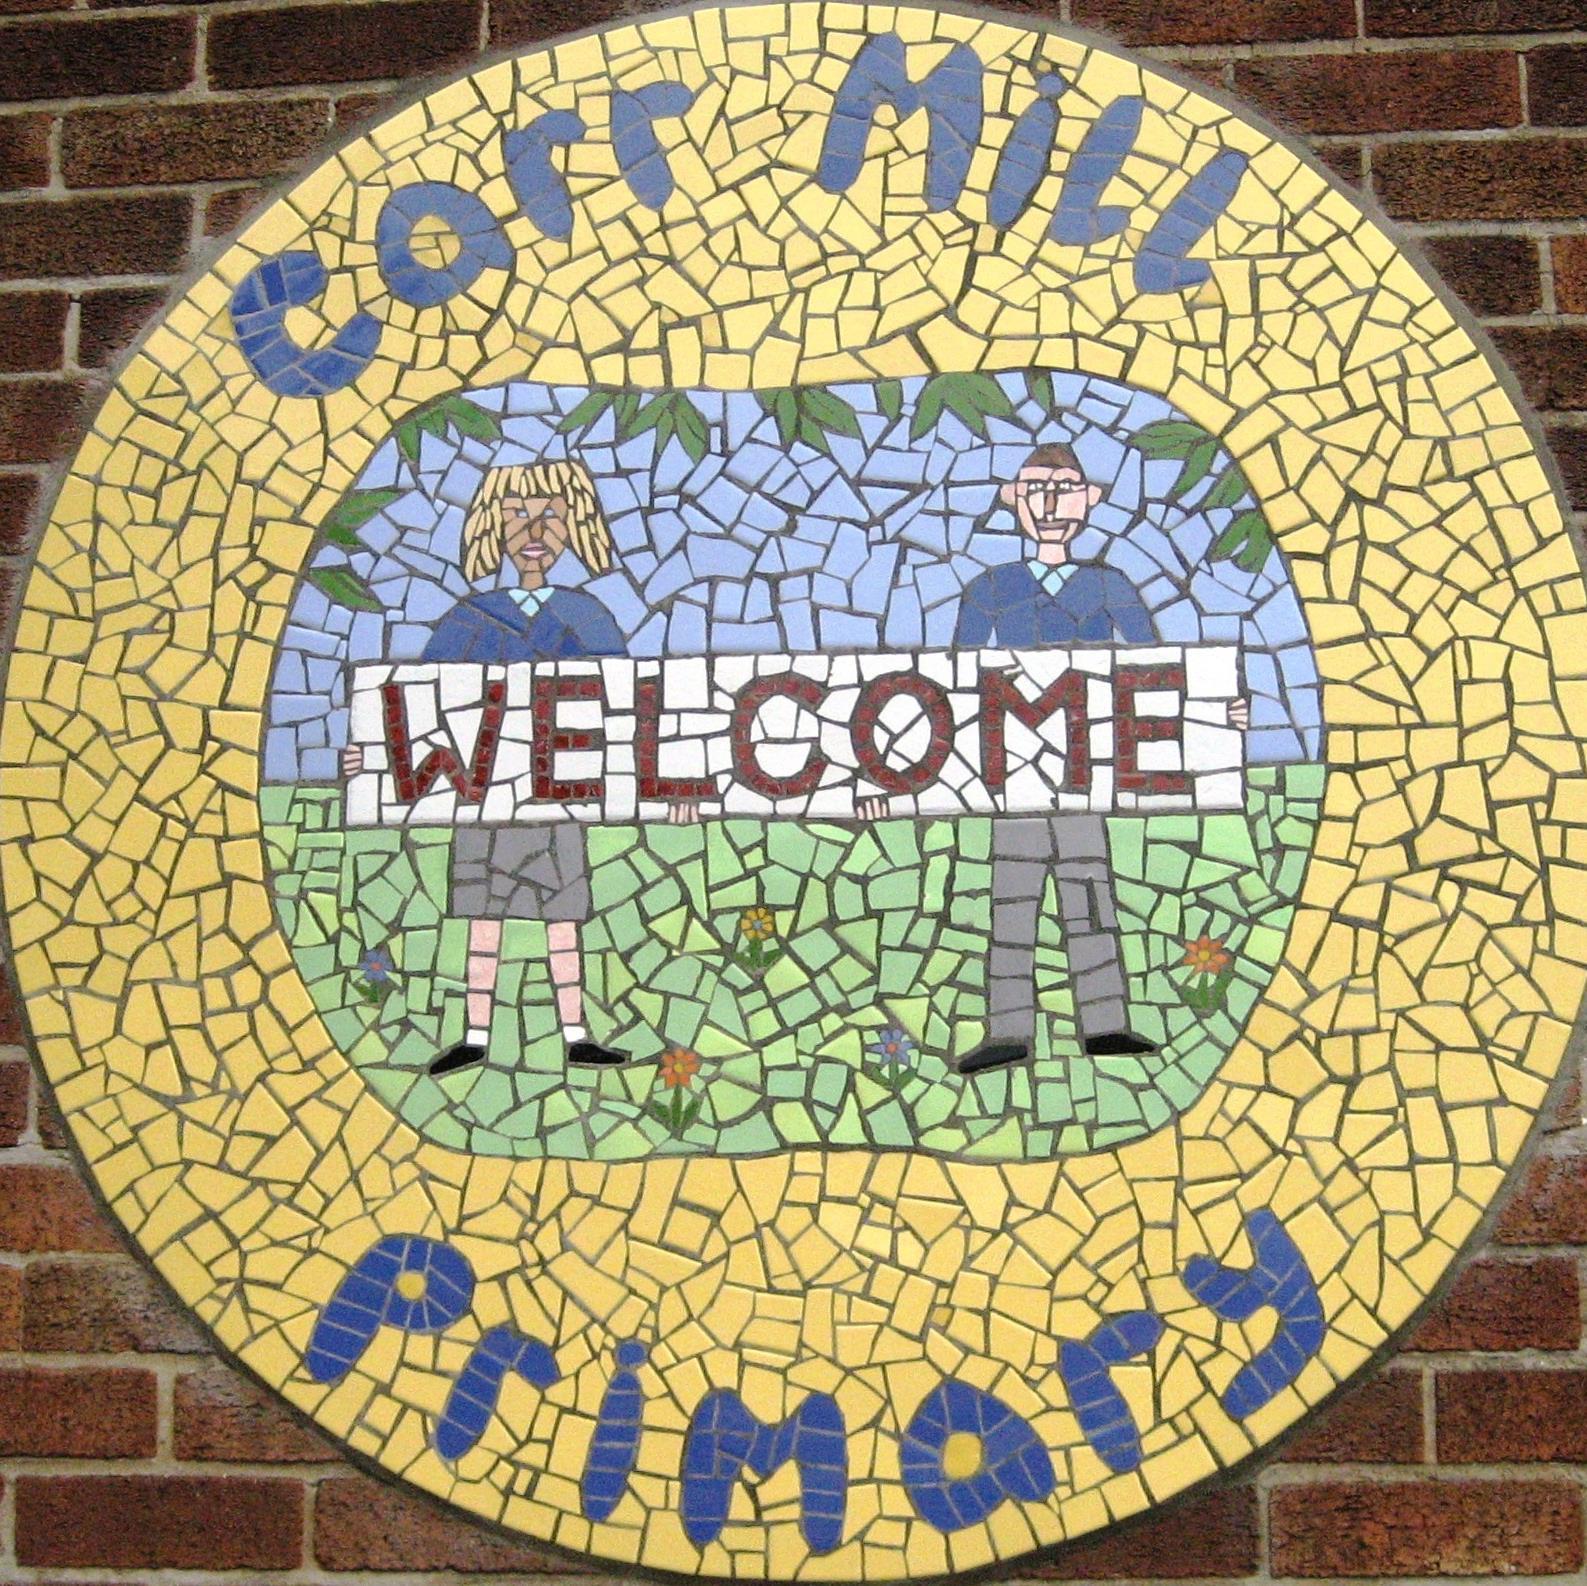 A primary school in St Helens
#teamcarrmill 
 https://t.co/KhN5Ny2mJp